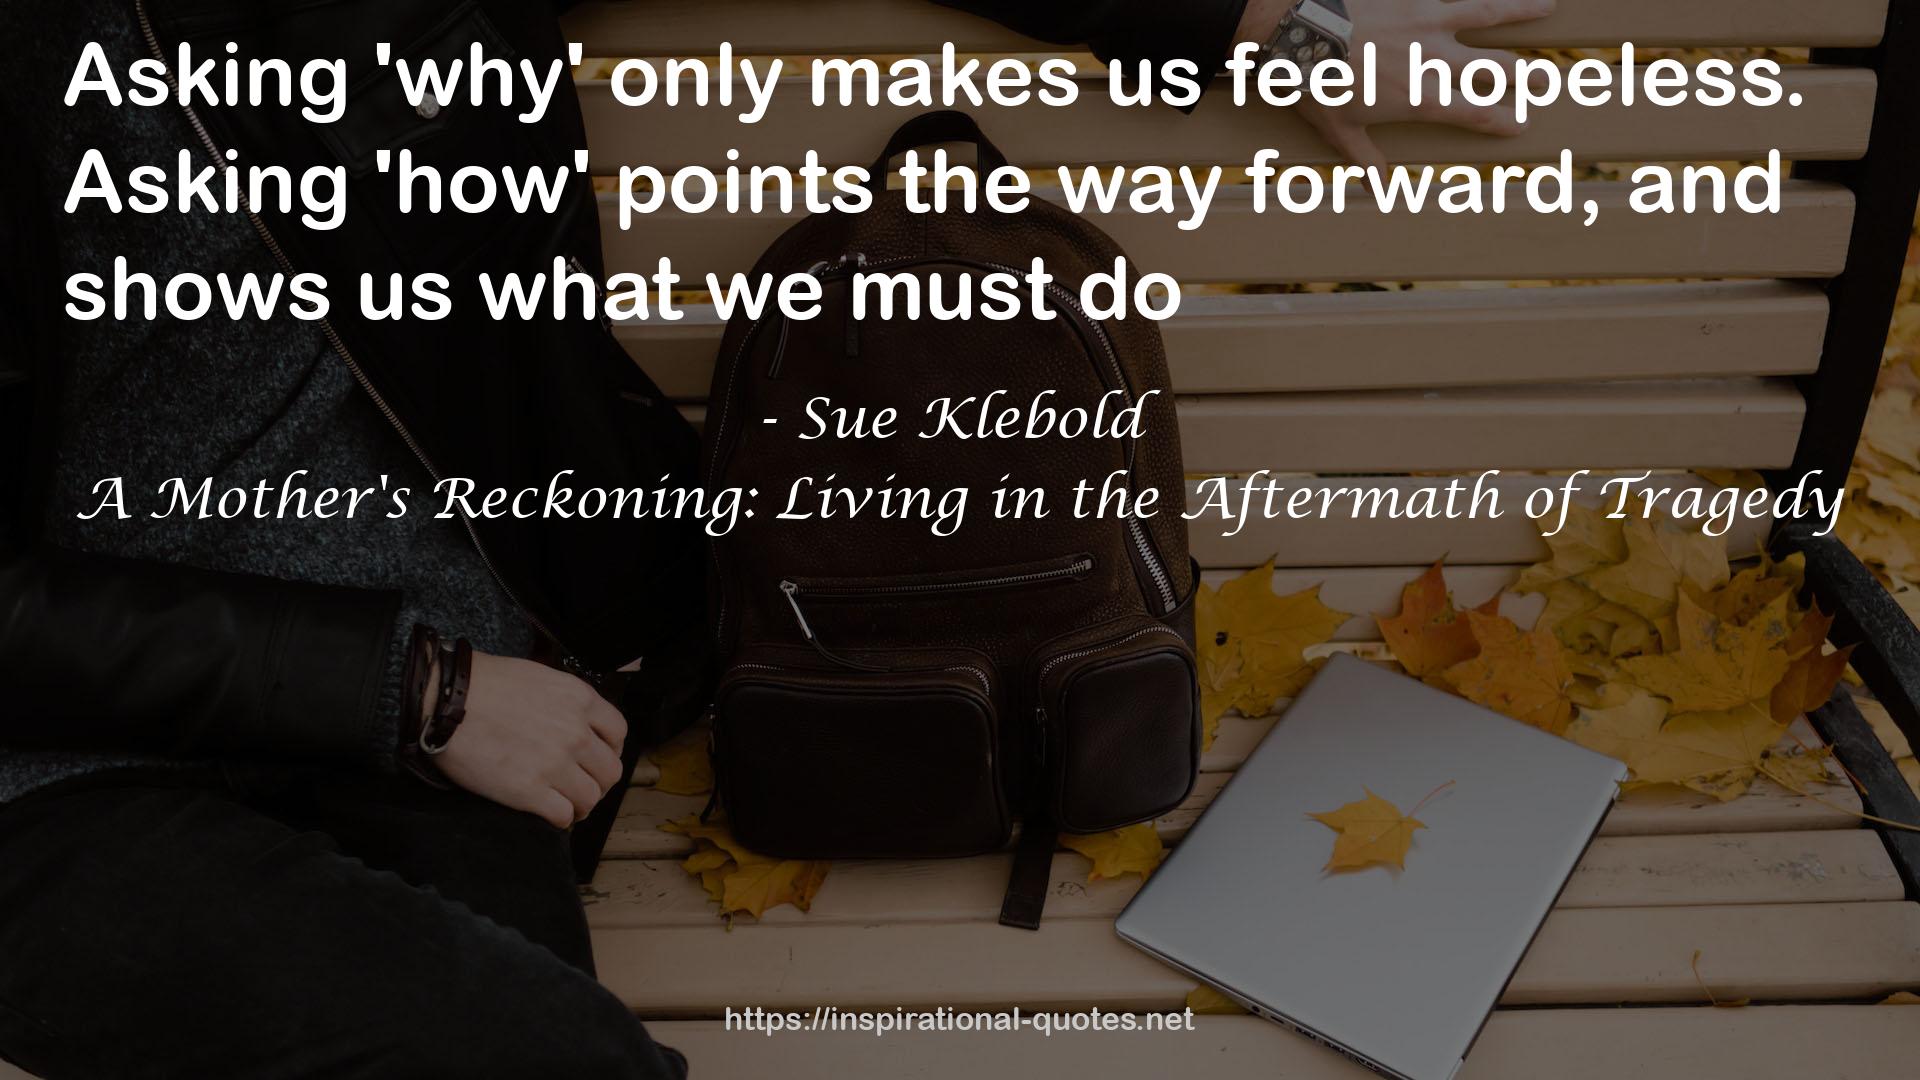 A Mother's Reckoning: Living in the Aftermath of Tragedy QUOTES